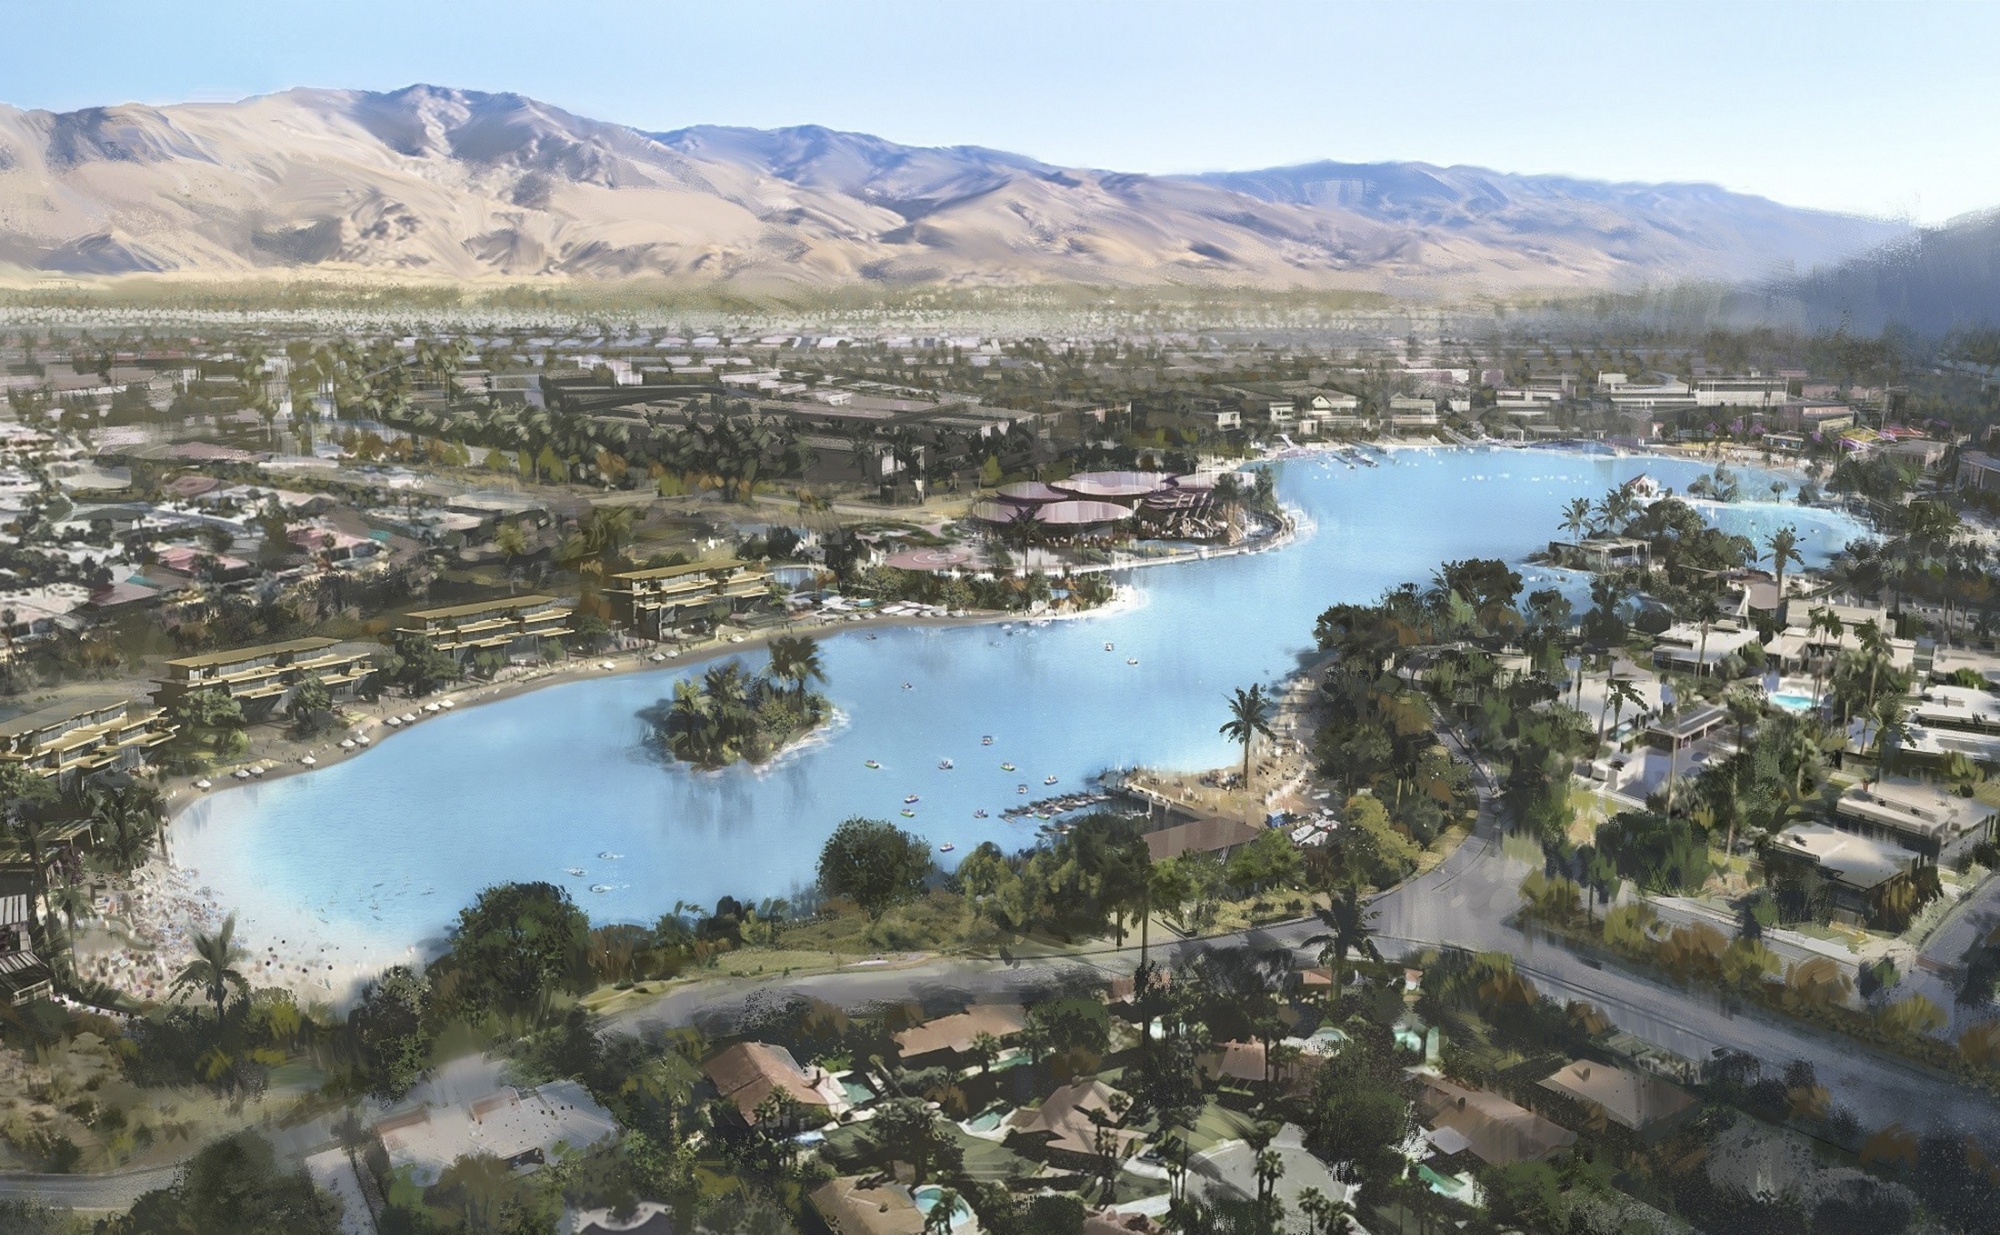 Artist’s&nbsp;rendering of Cotino, the first “Storyliving by Disney”&nbsp;community that&nbsp;will be located in Rancho Mirage, California.&nbsp;